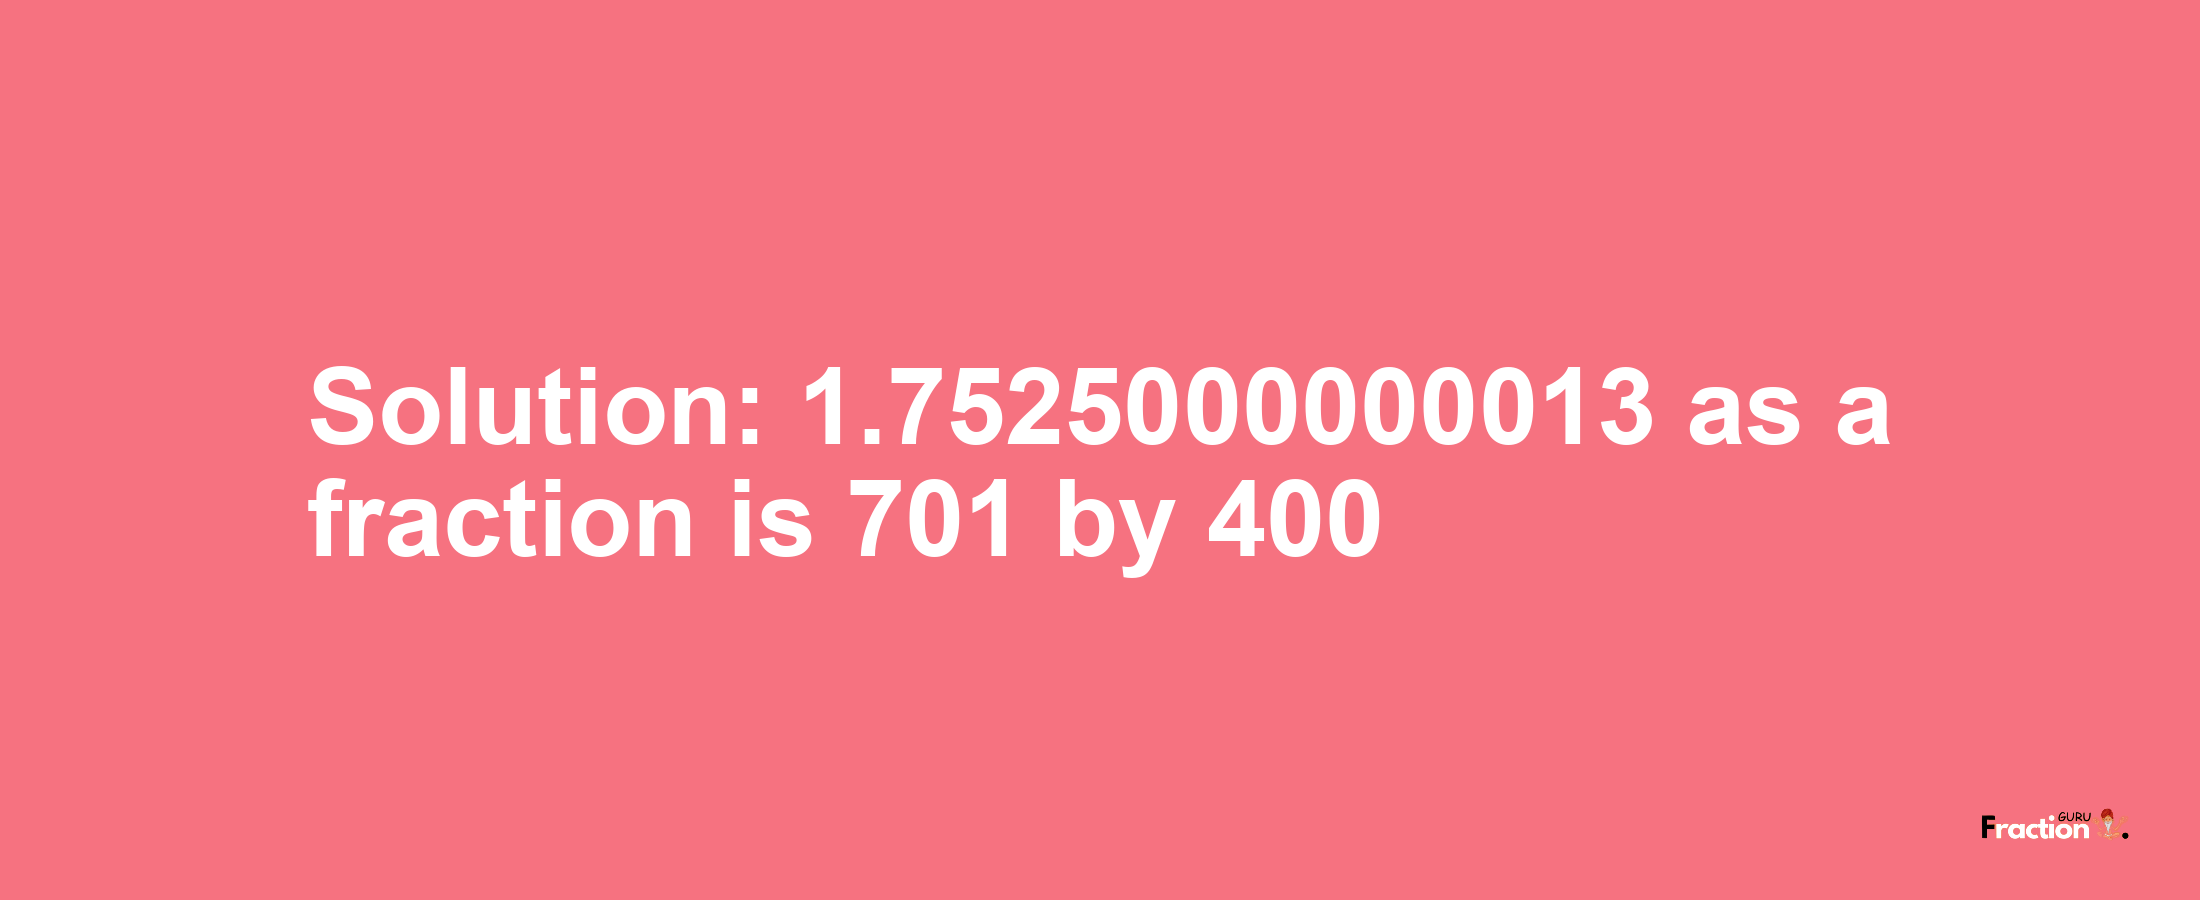 Solution:1.7525000000013 as a fraction is 701/400